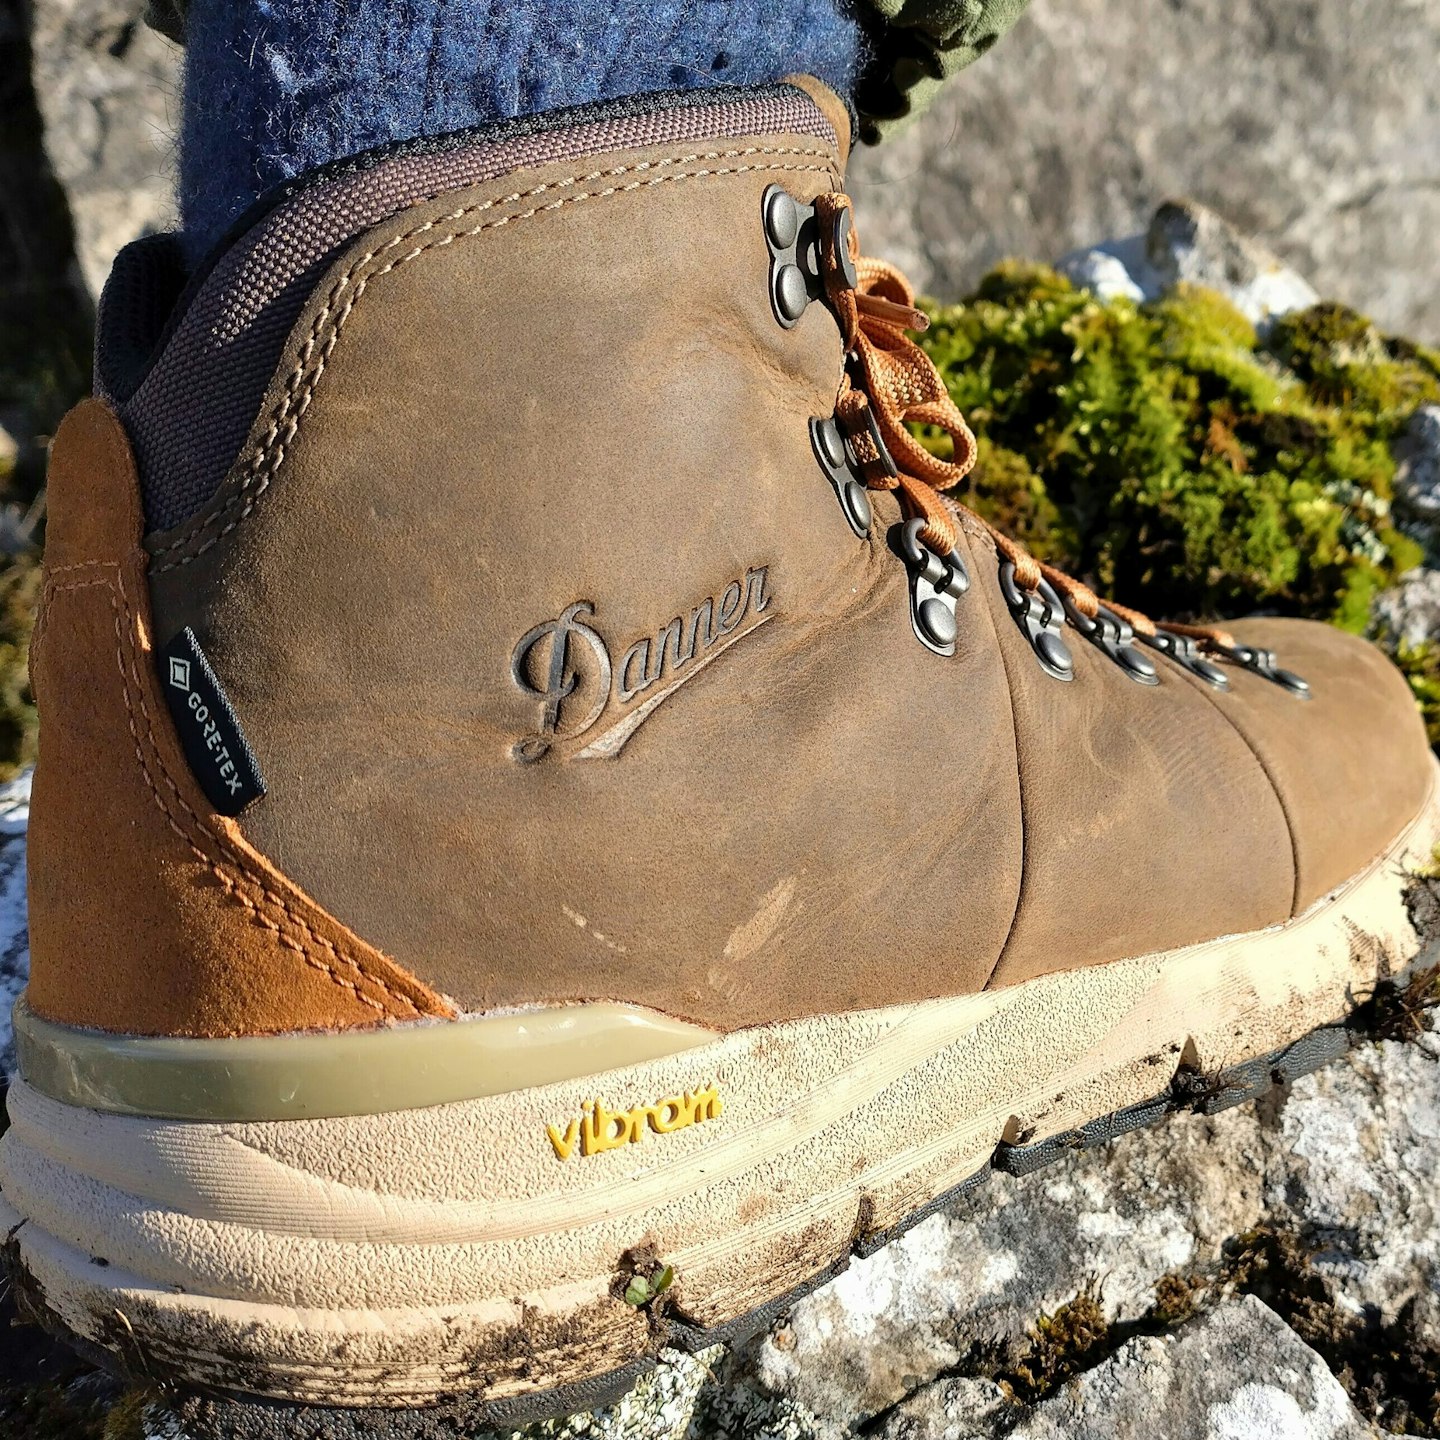 Danner Mountain 600 Leaf GTX upper and midsole